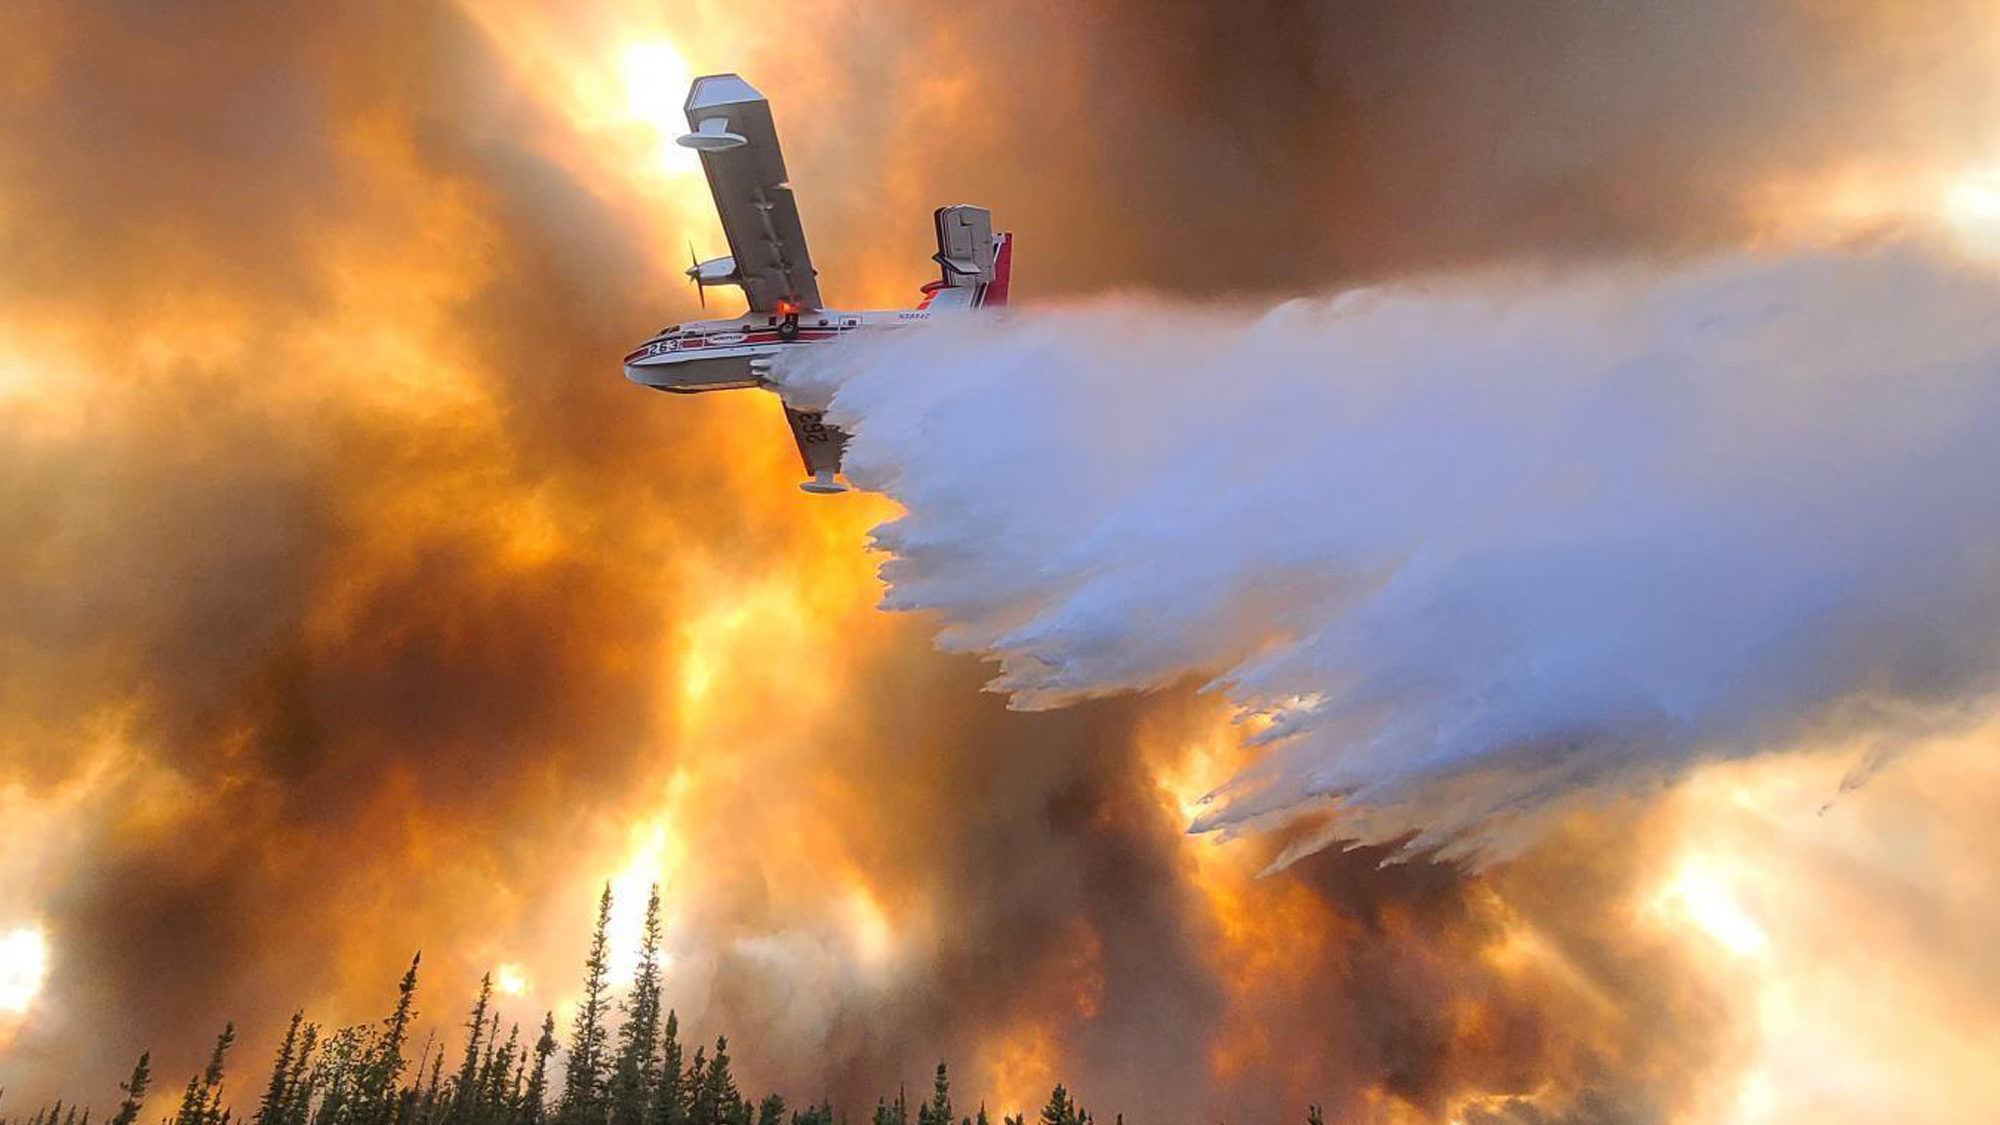 Fire fighting plane above forest fire in Alaska...